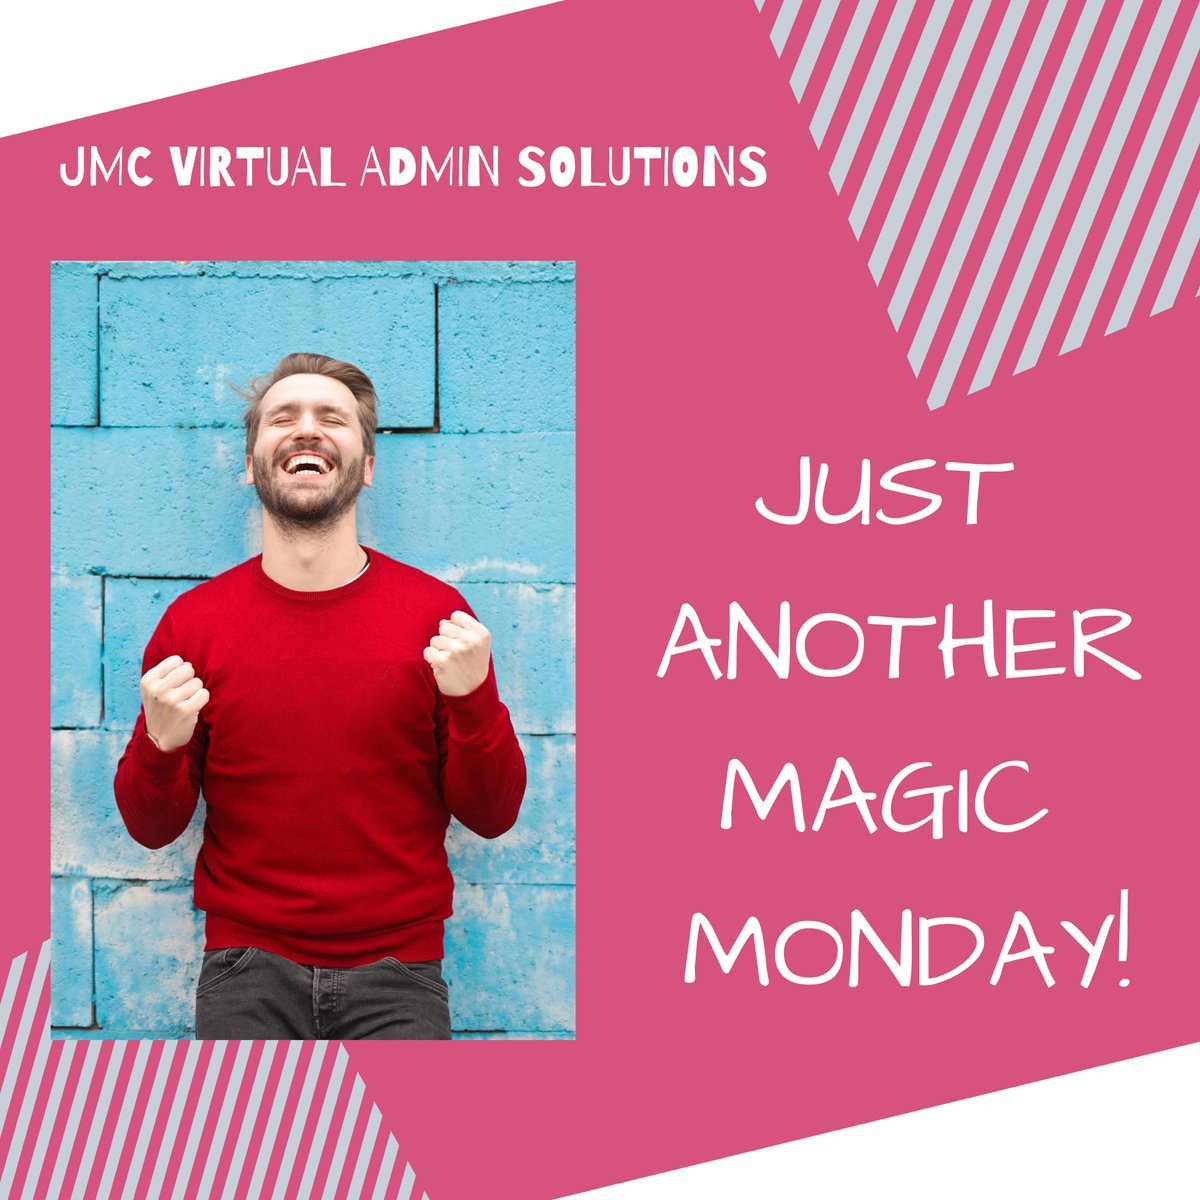 How’s everyone today? Ready for it after the weekend? A lot on for us this week for the JMC team! #jmcvirtualadminsolutions #newweek #magicmonday #outsourcing #localbusinessesworkingtogether #chorley #chorleyfc